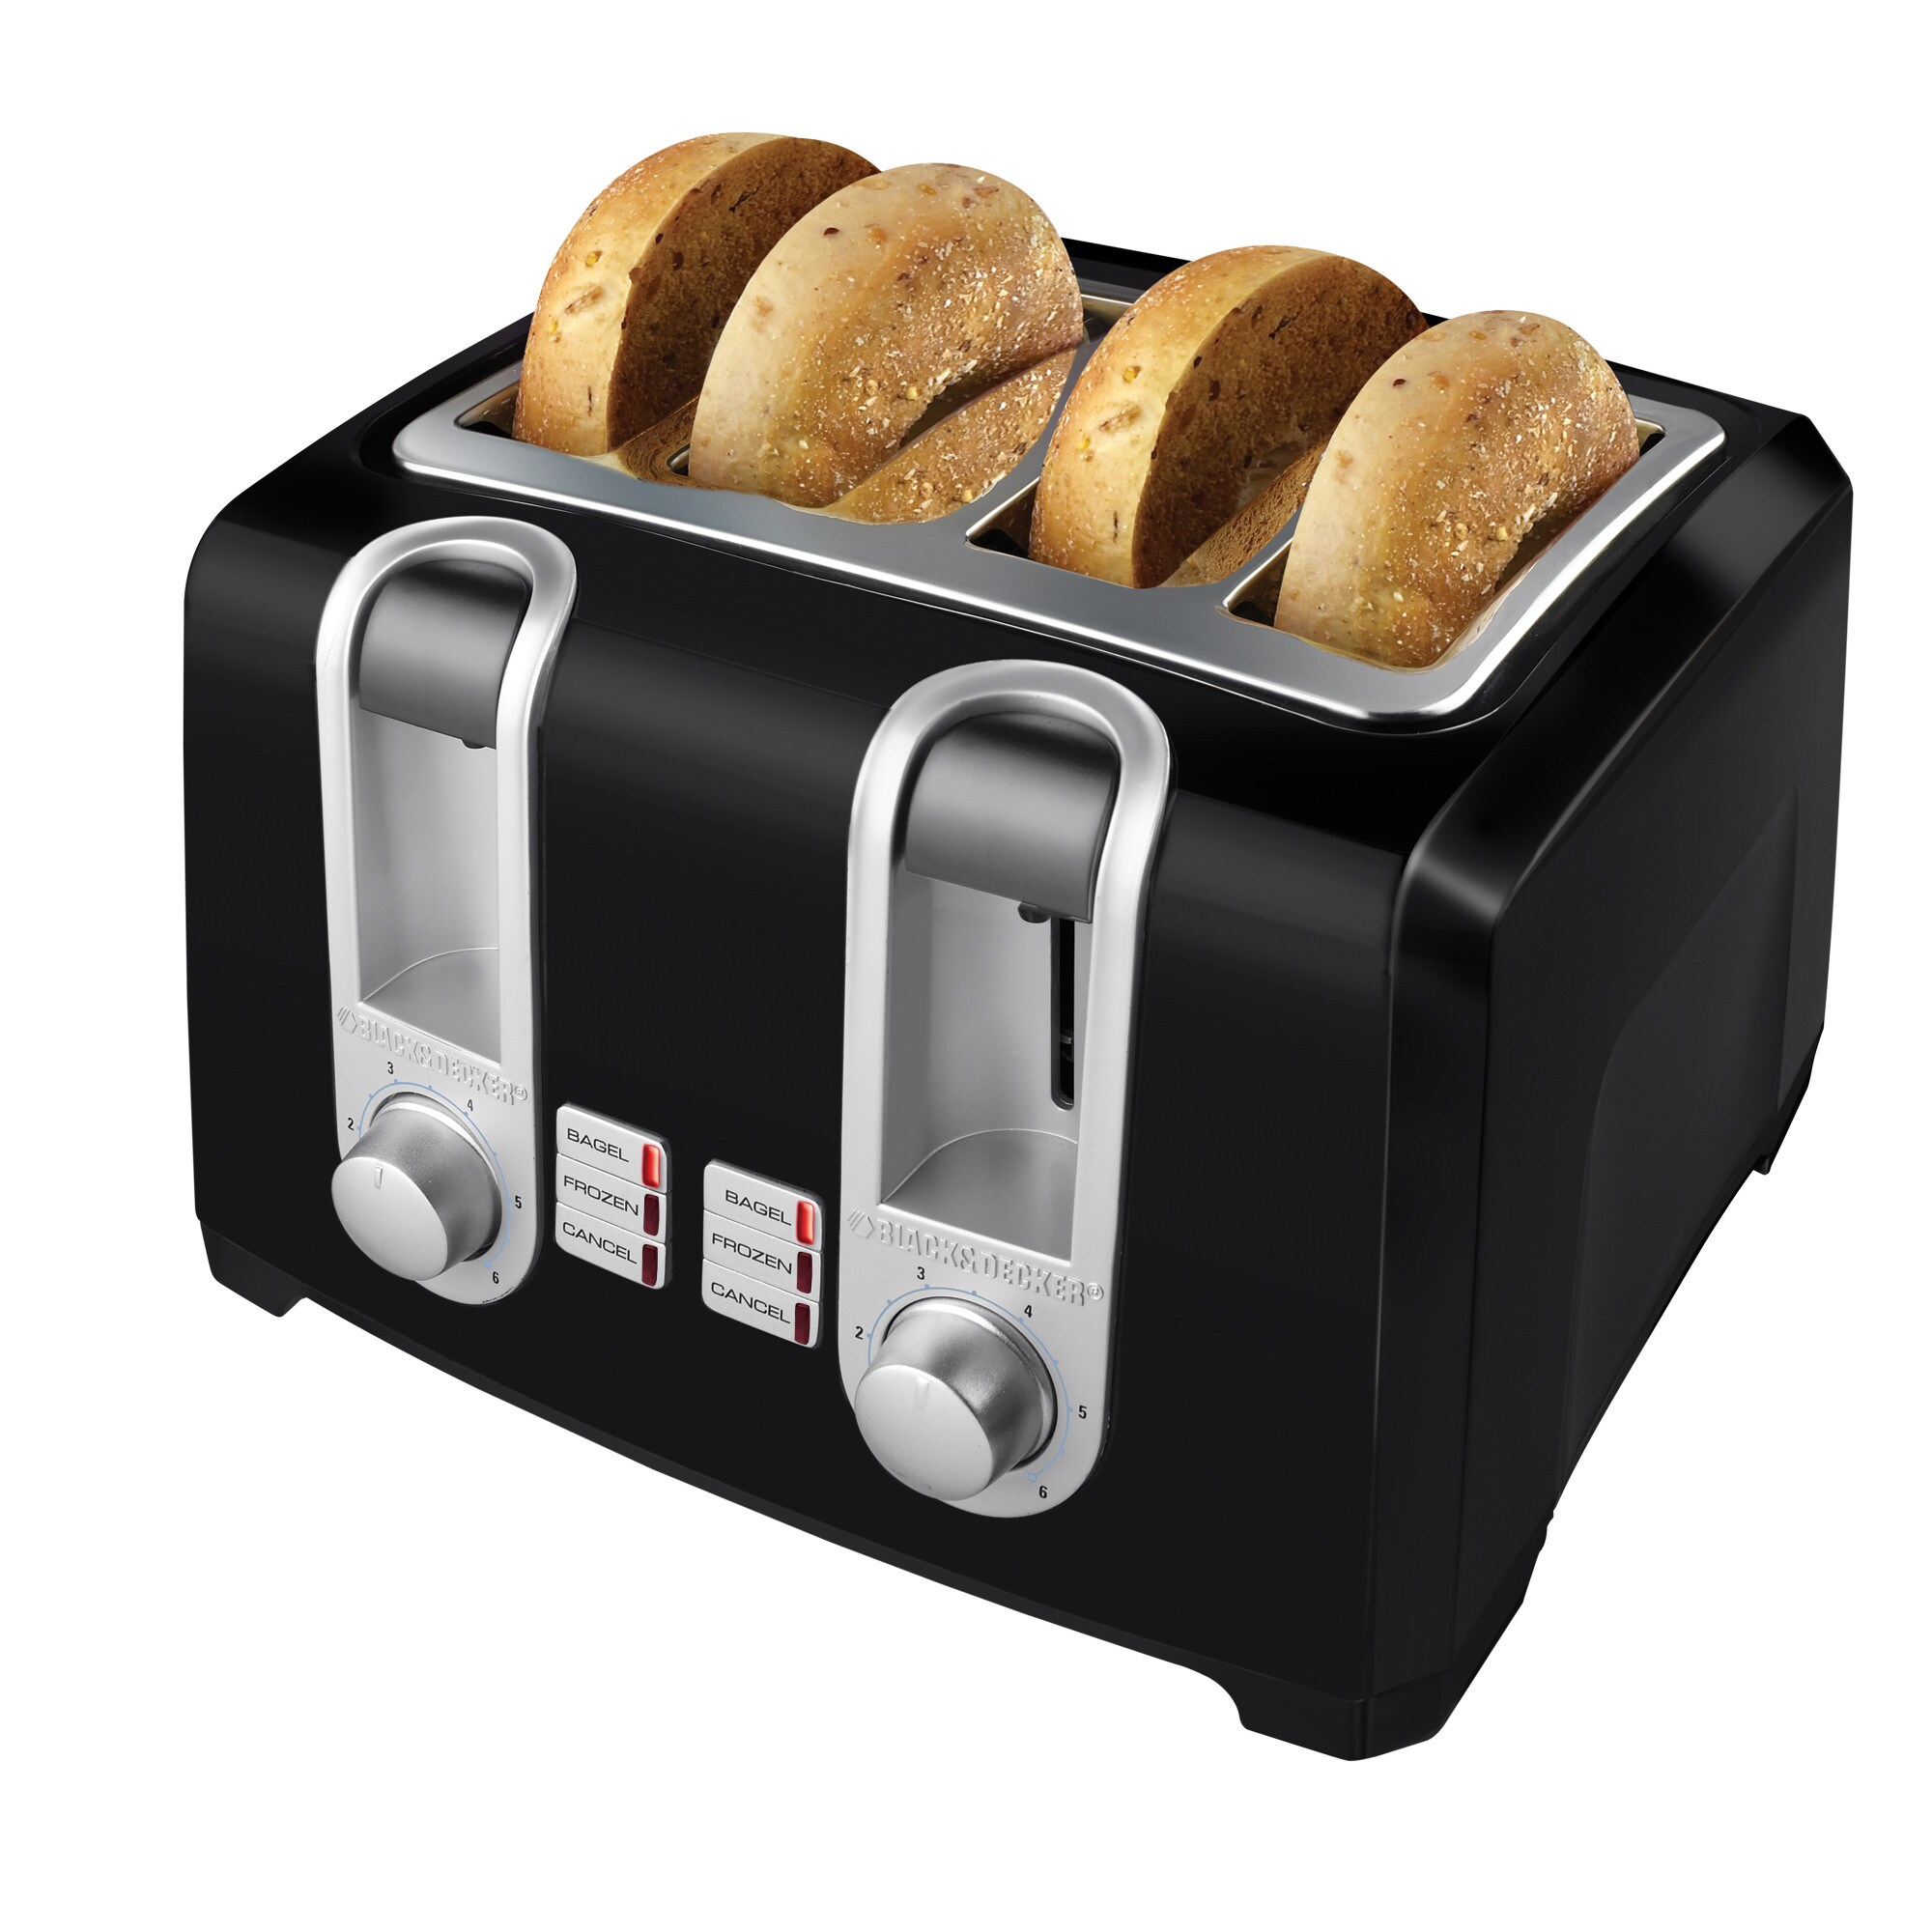 BETTER CHEF 4 SLICE DUAL CONTROL BREAD WAFFLE BAGEL TOASTER BLACK COOL TOUCH NEW 